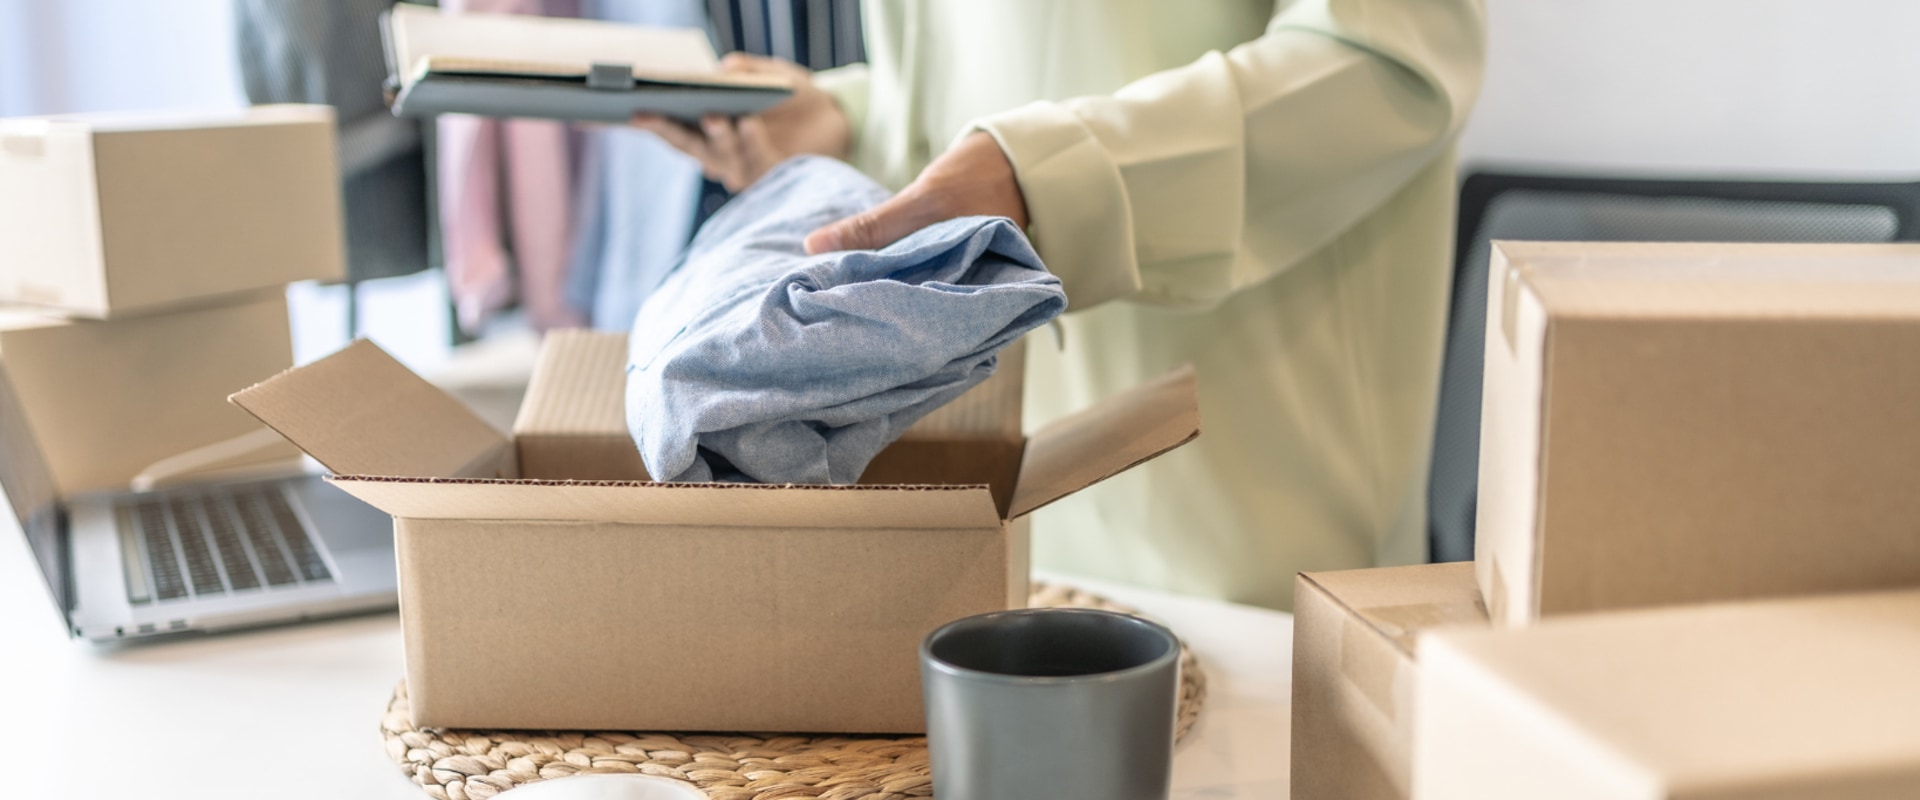 Fragile Item Packing Services: What You Need to Know